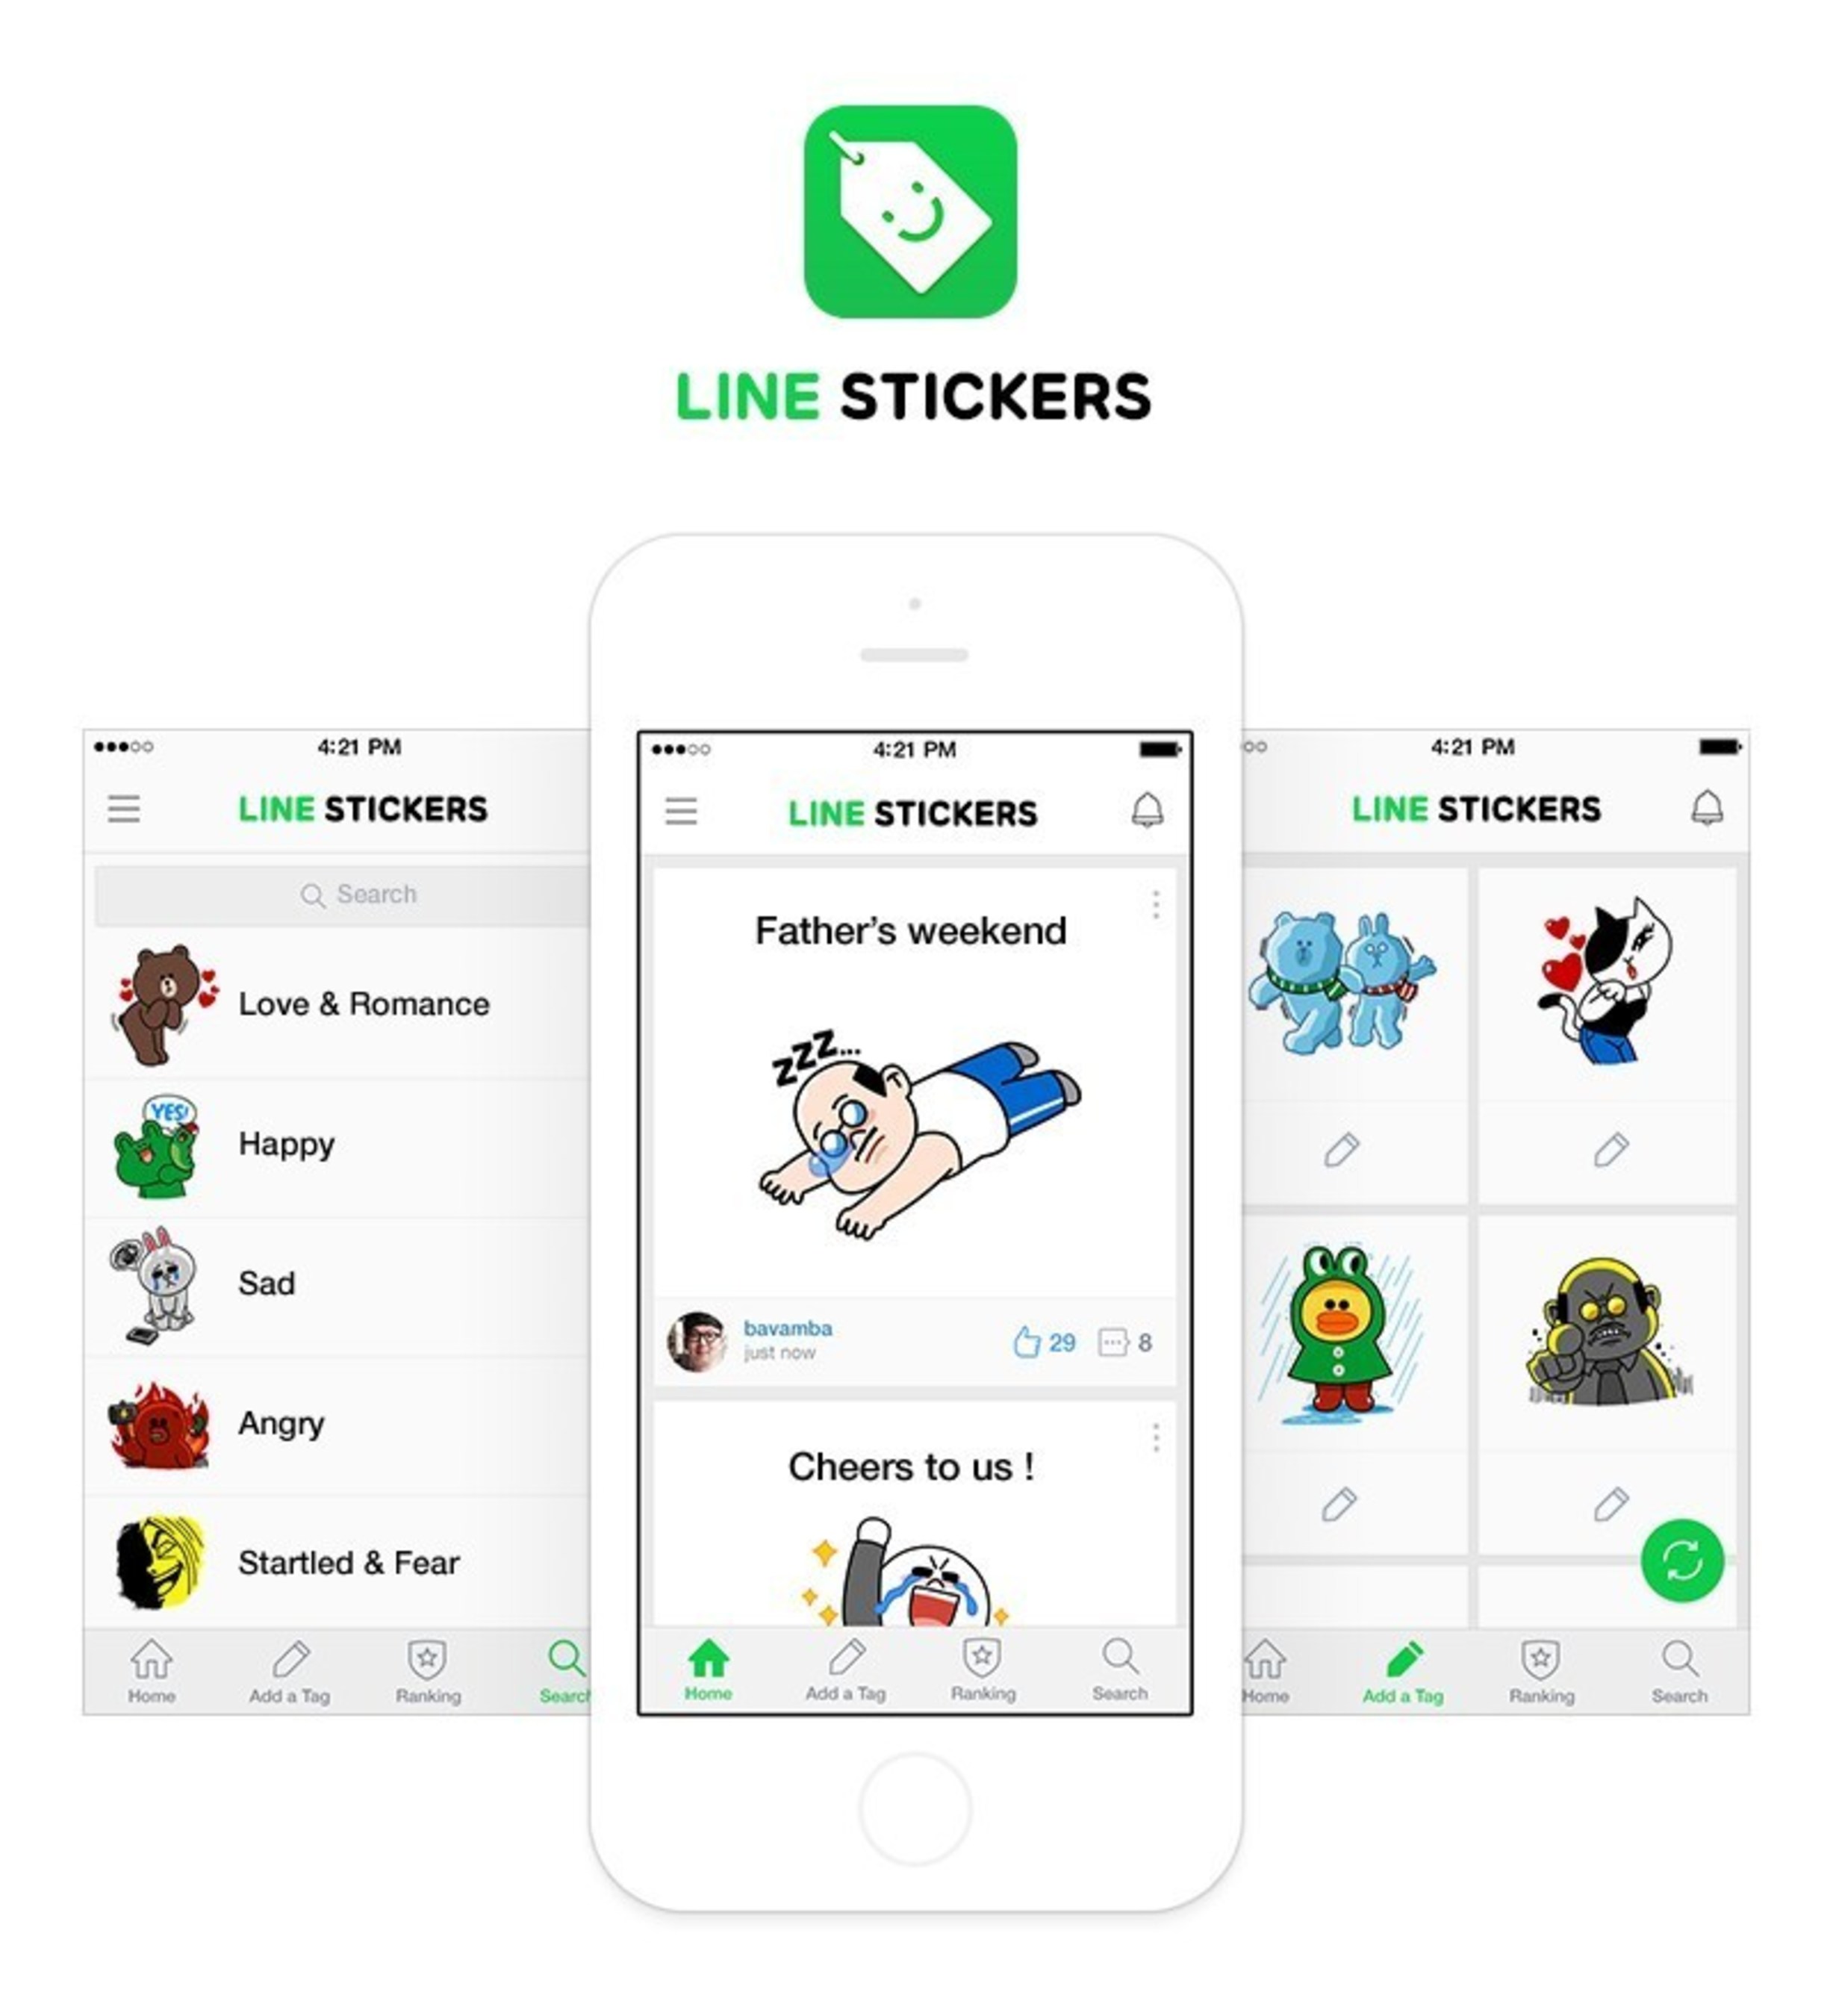 Announcing the Official Release of LINE Stickers, the Sticker Posting Community App That Lets Users Share Stickers Tagged with Short Phrases